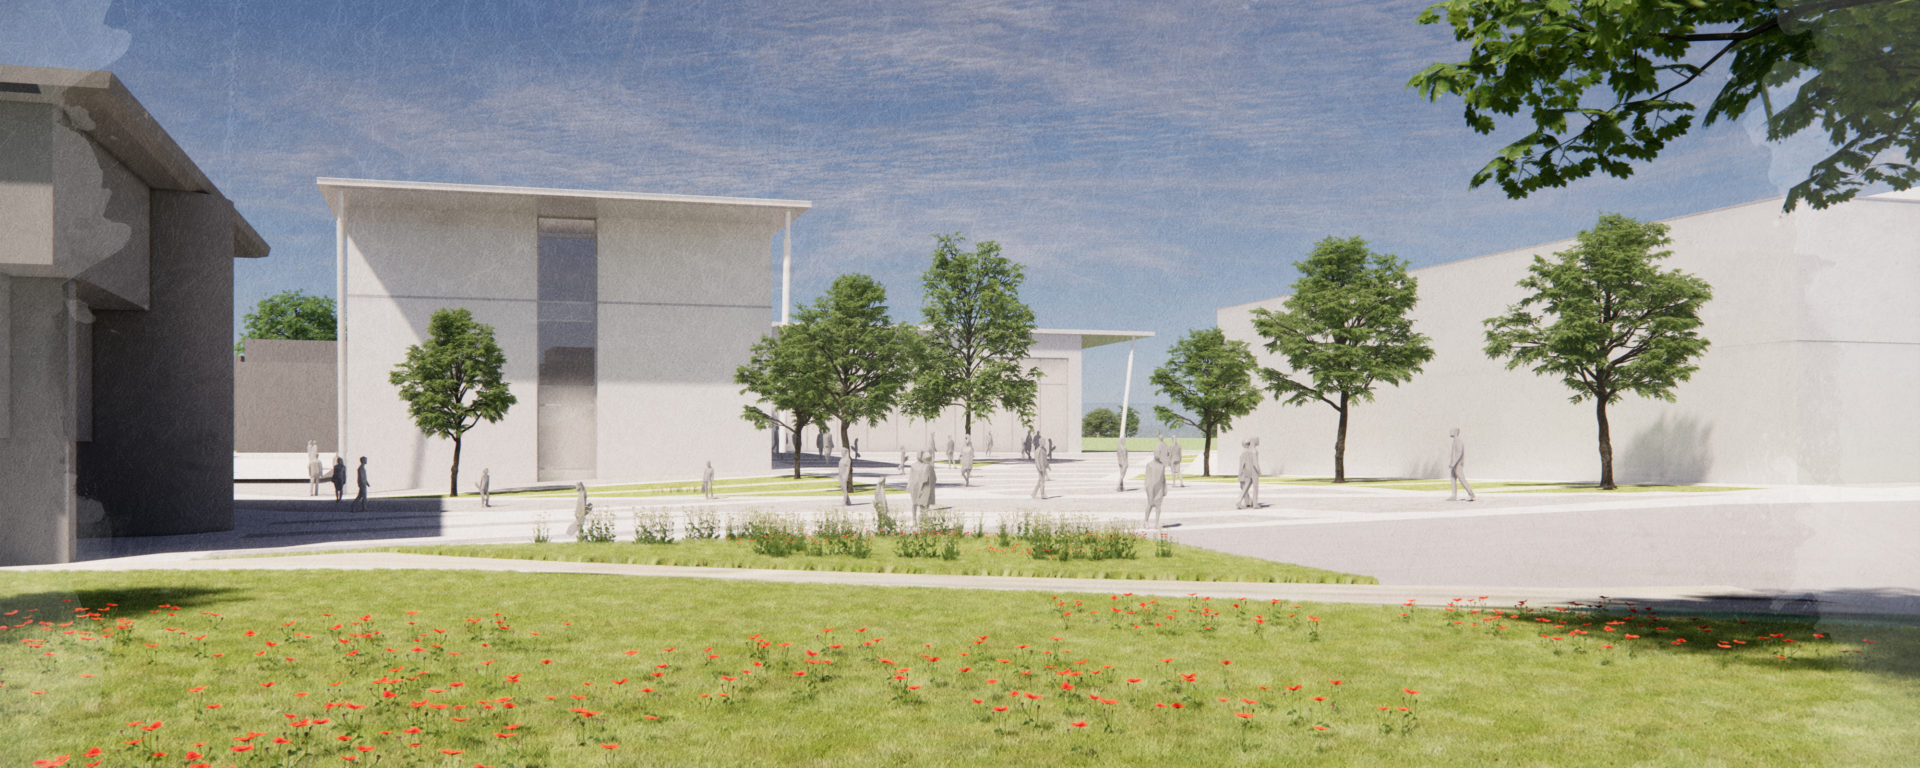 Artist's impression of the Tech building